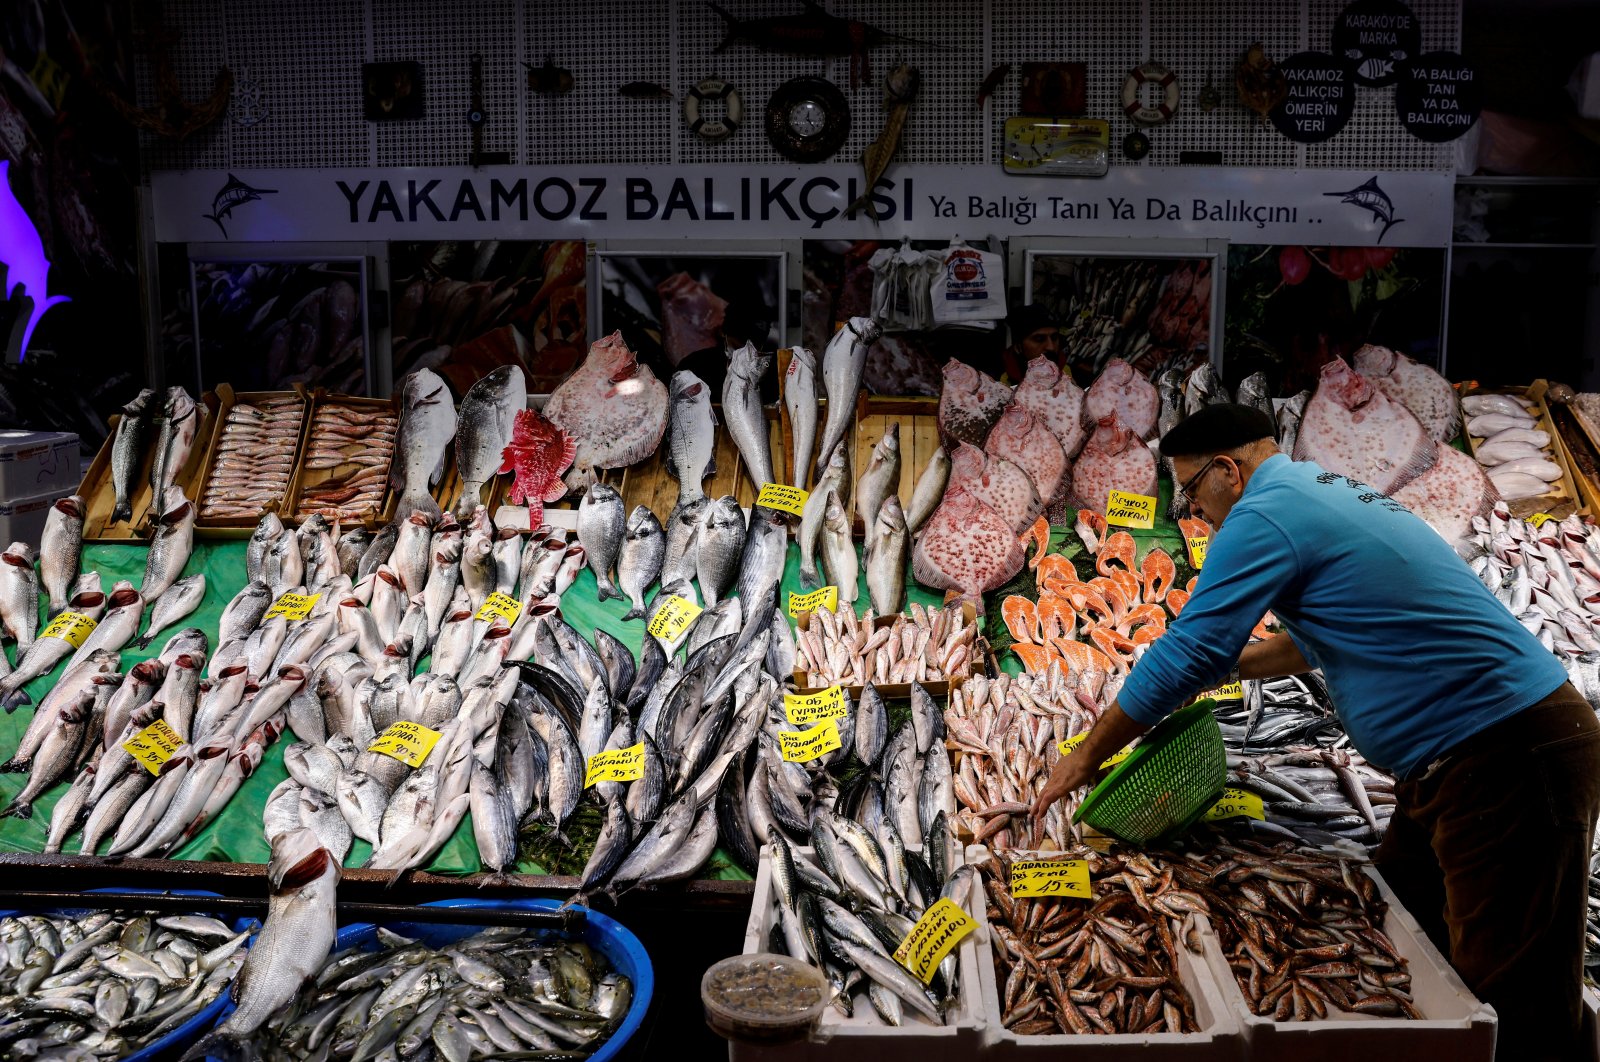 People shop at a fish market in the Karaköy district of Istanbul, Turkey, Jan. 8, 2021. (Reuters Photo)